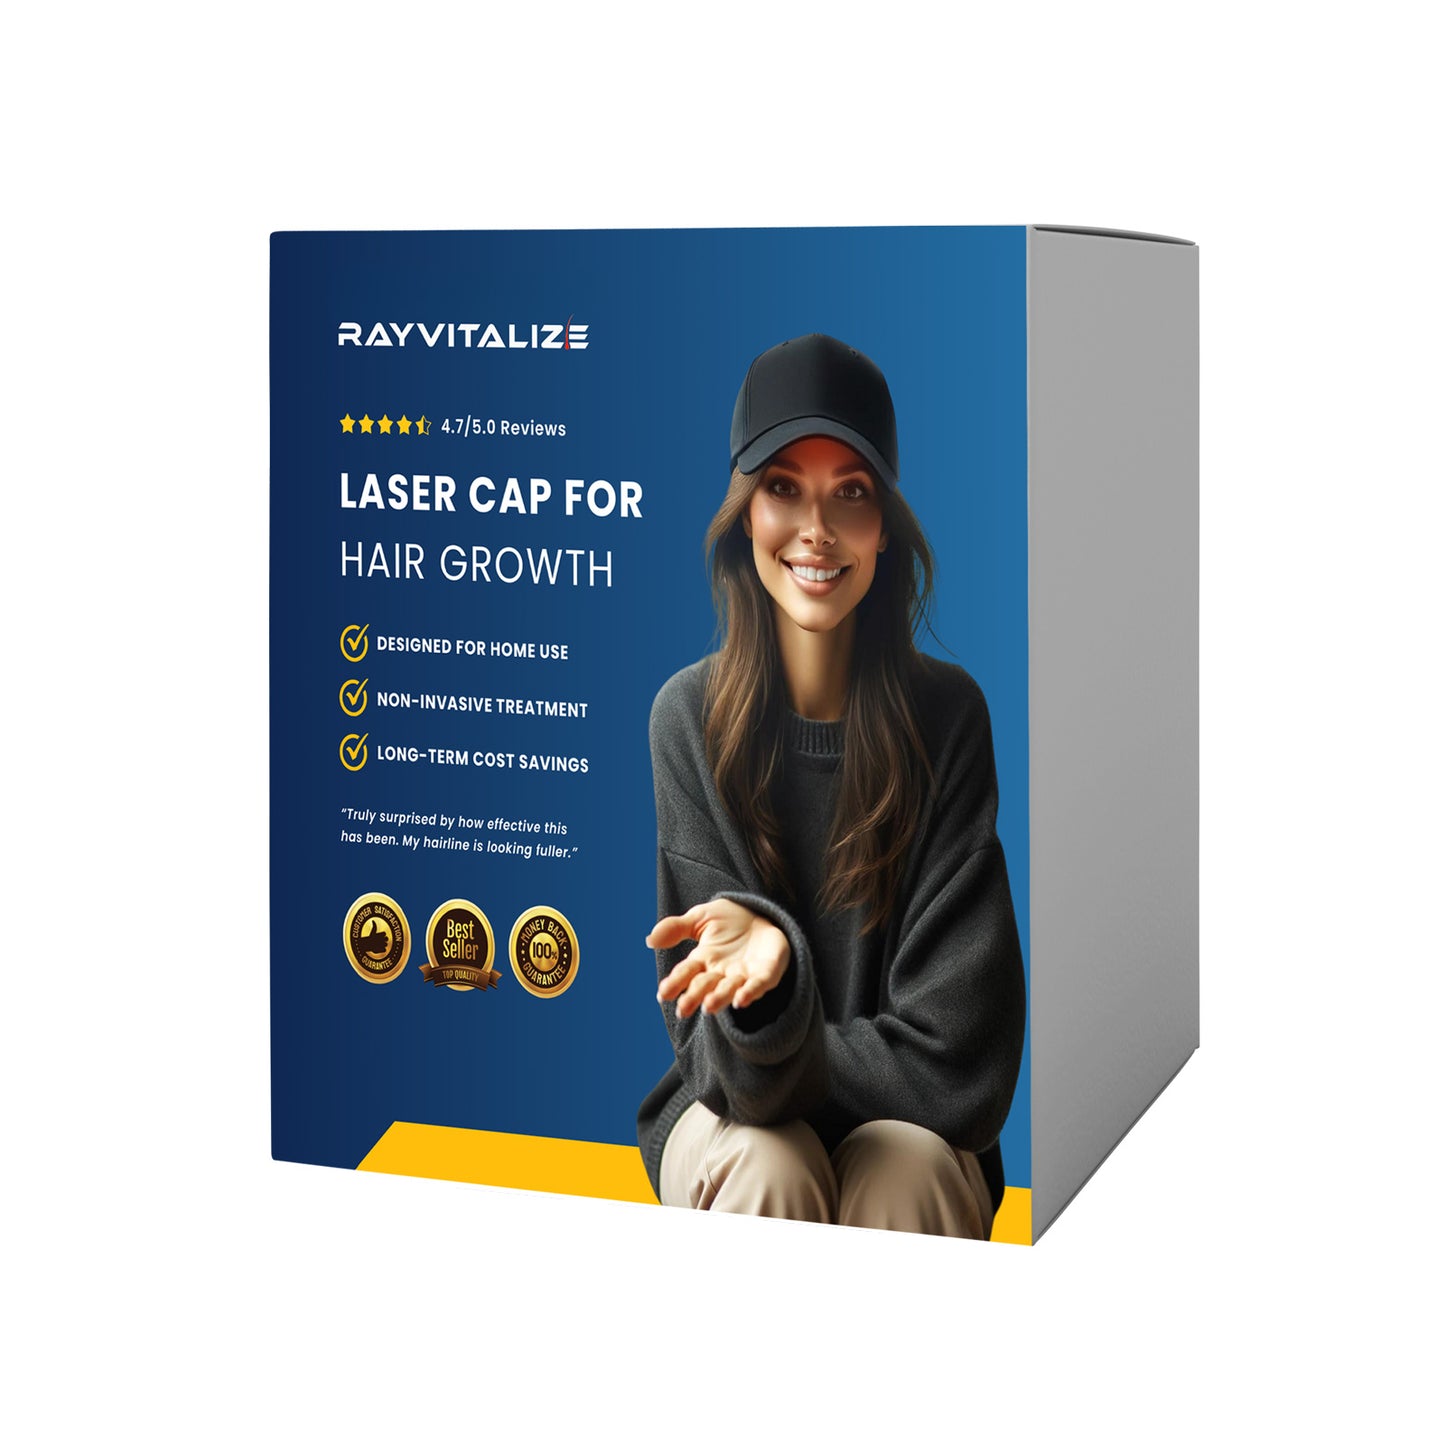 Rayvitalize™ 110 - Laser Cap For Hair Growth